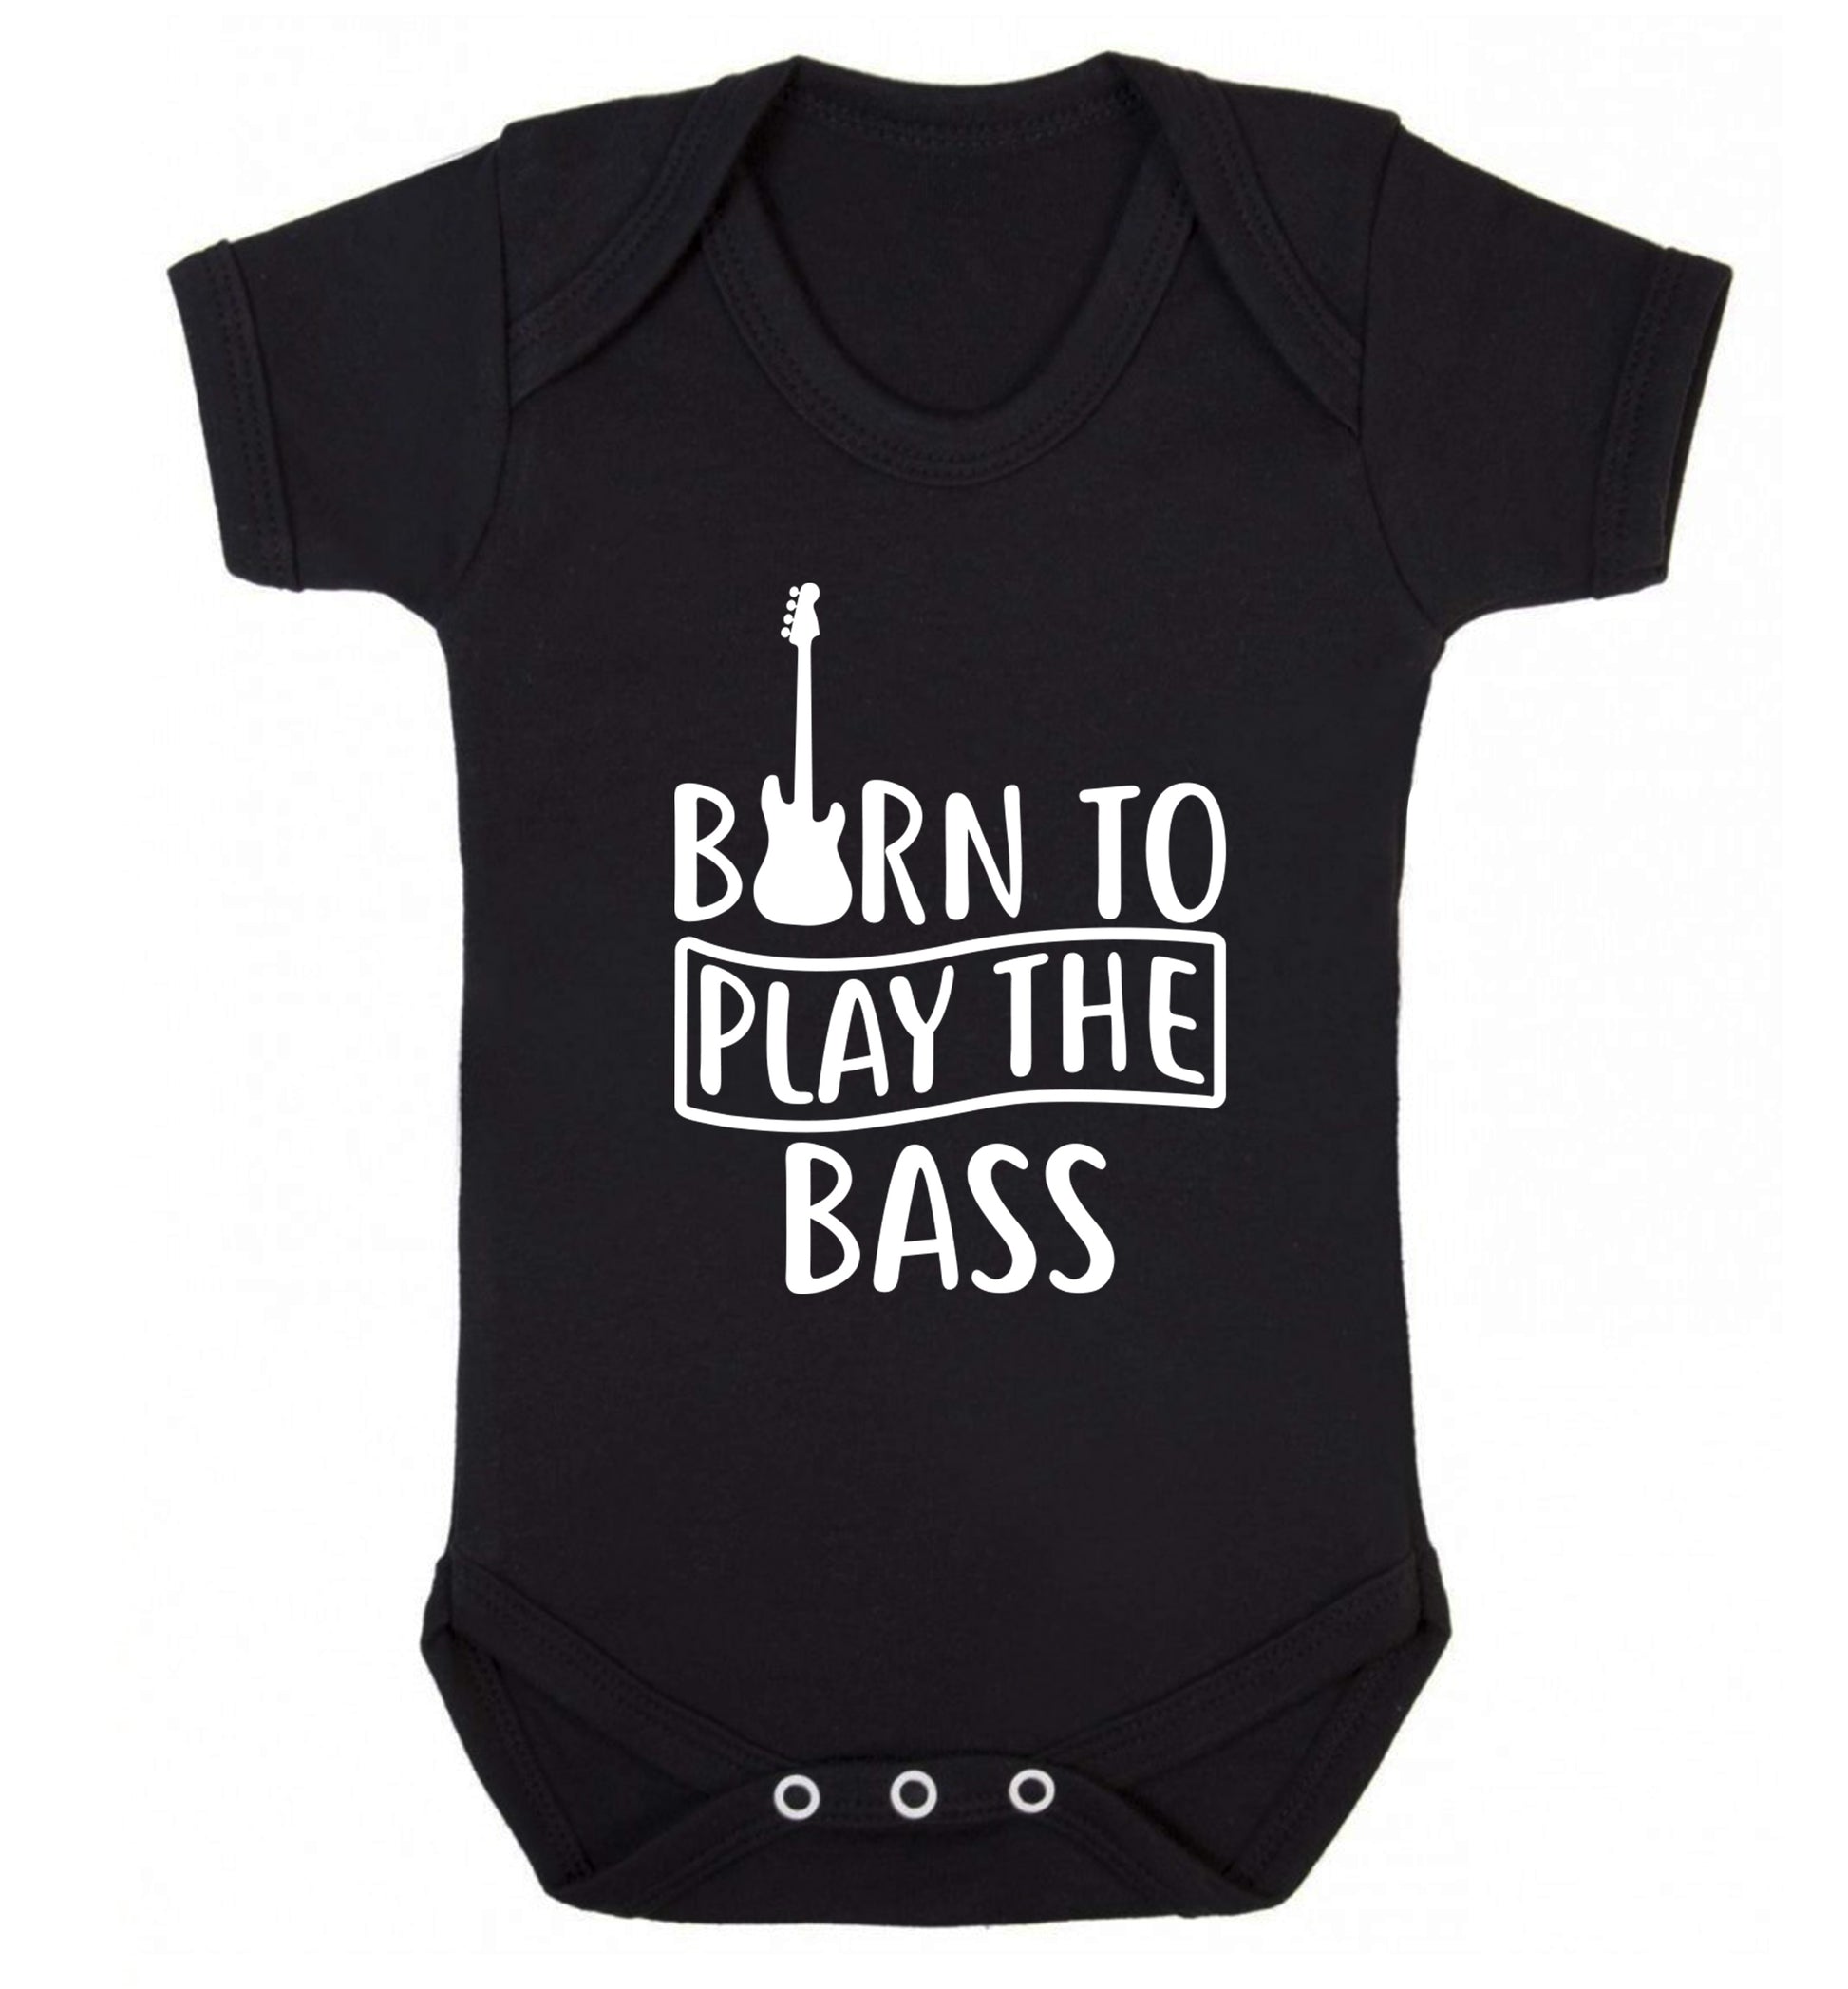 Born to play the bass Baby Vest black 18-24 months